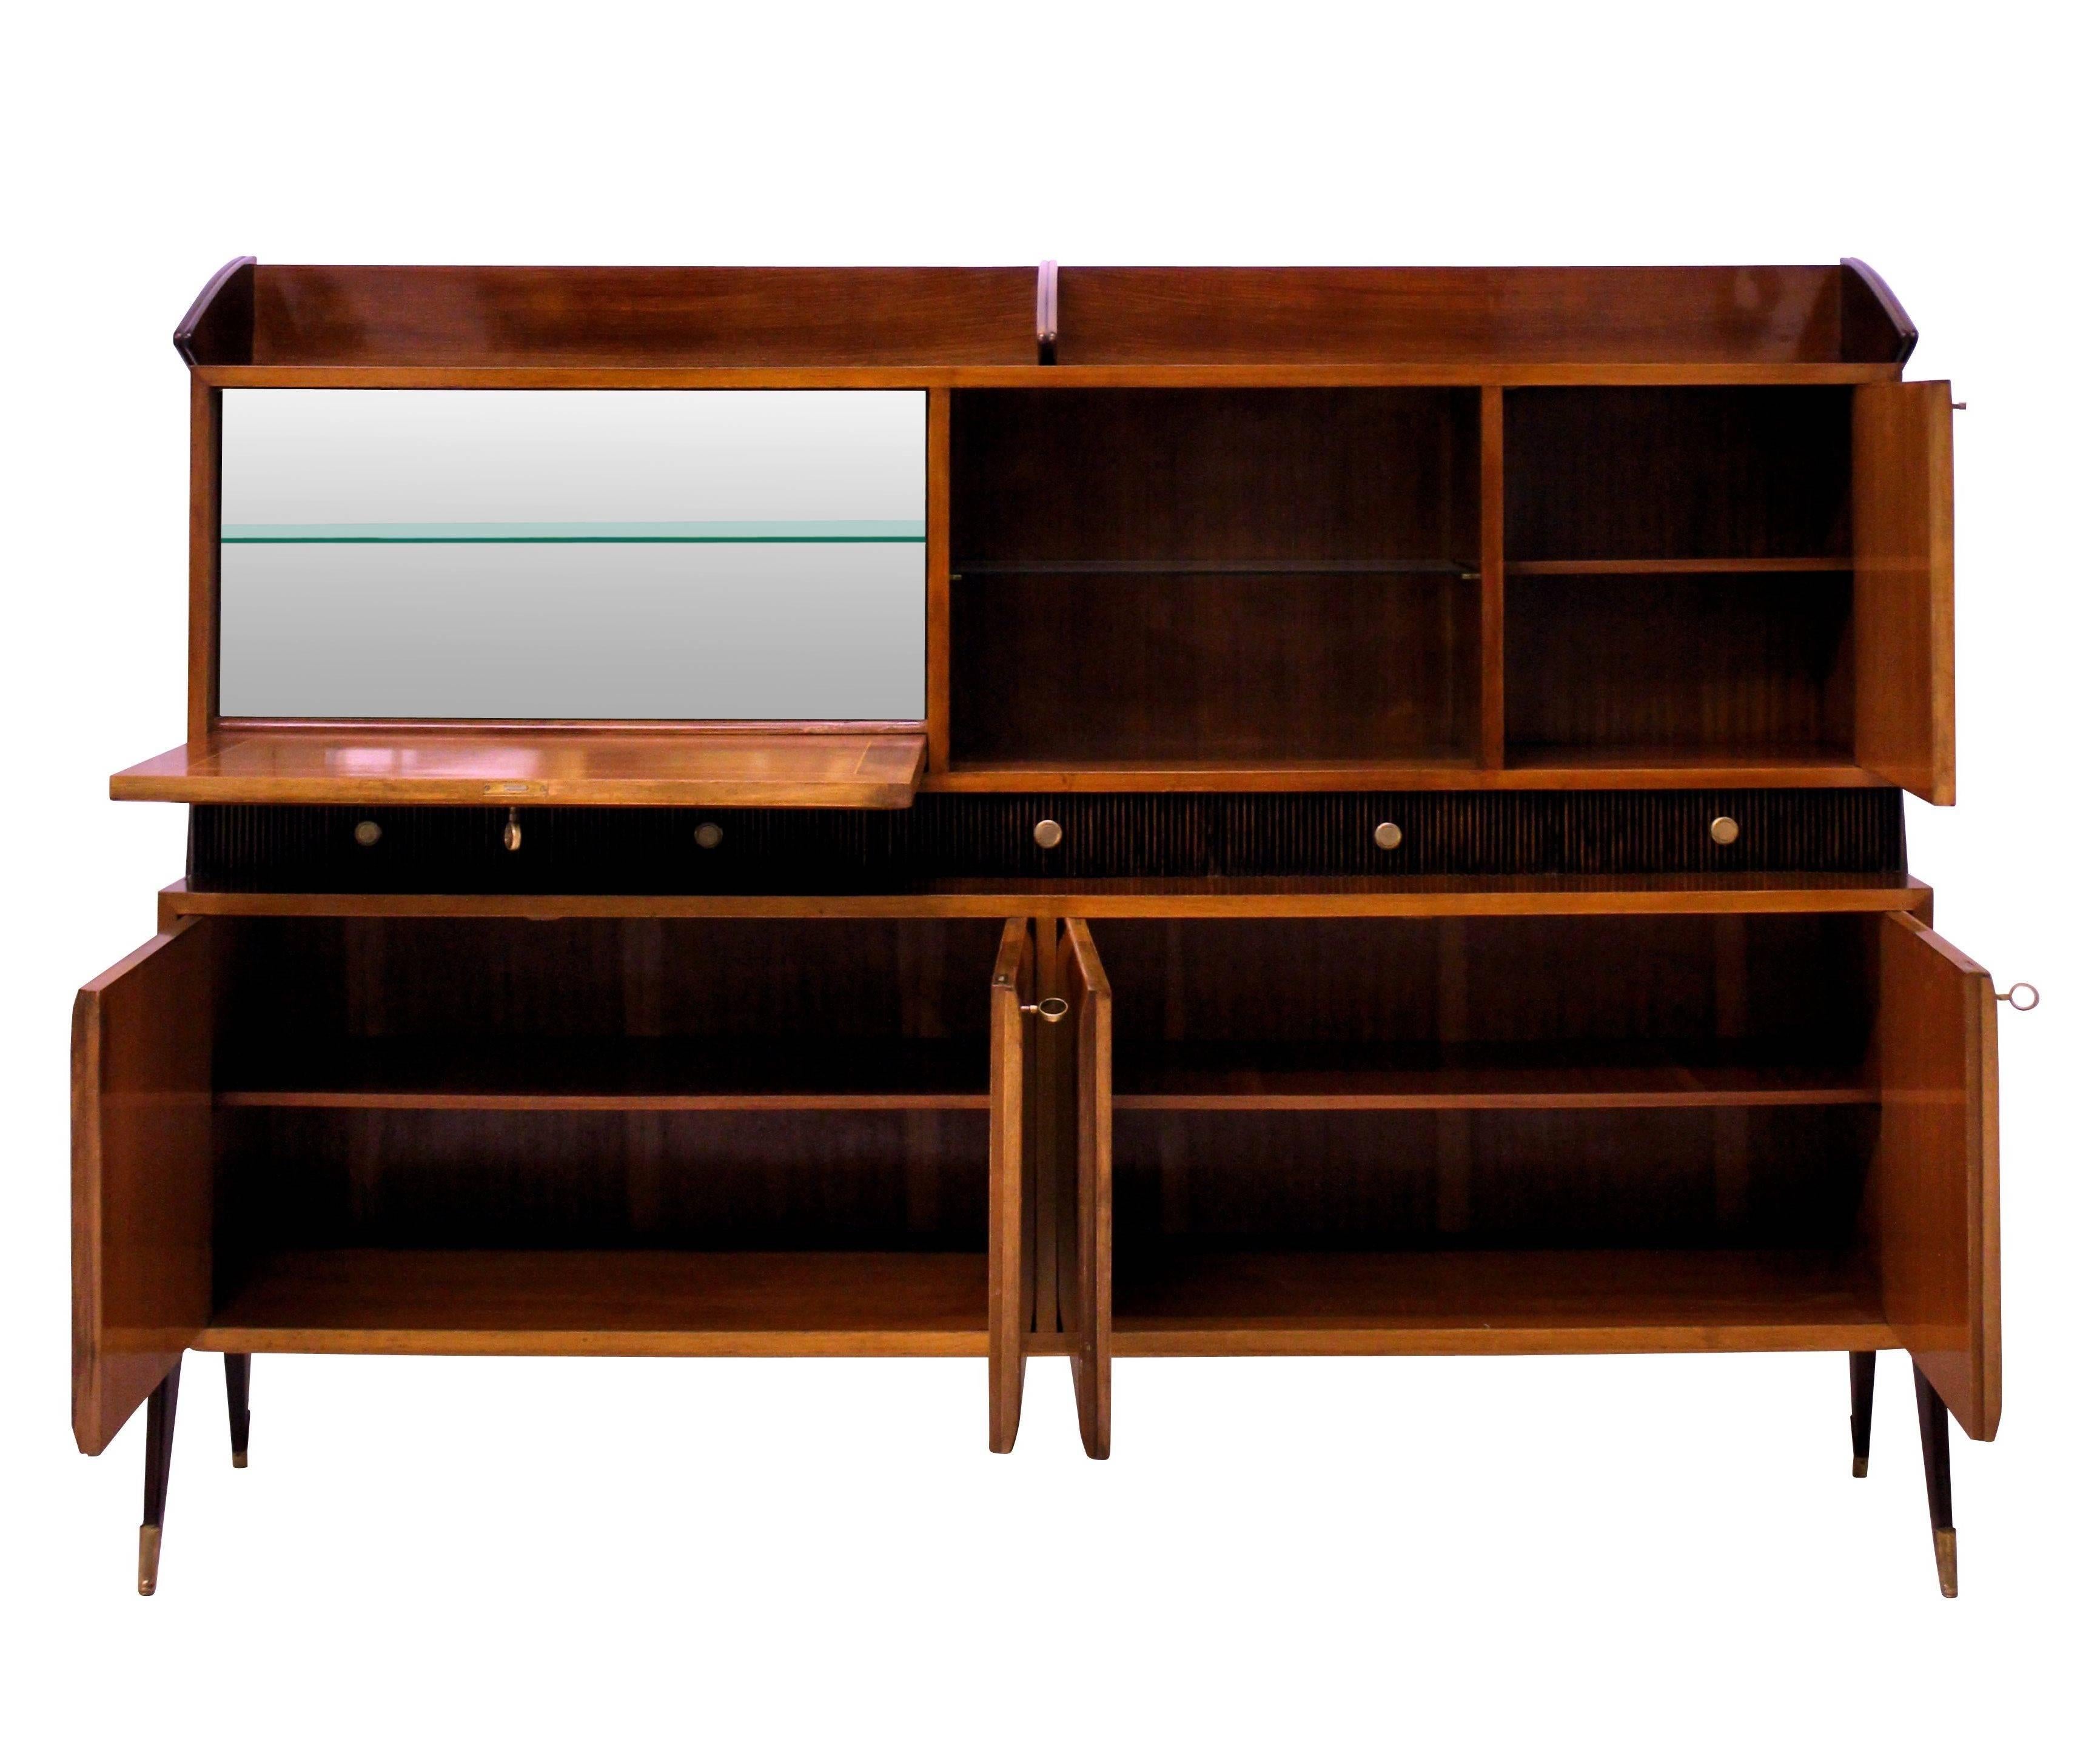 An Italian cabinet of very large proportions and of good quality. In rosewood and walnut comprising many lockable compartments, glass shelf, tambour fronted drawers and a mirror lined bar cabinet. Of architectural design with beautiful detailing in